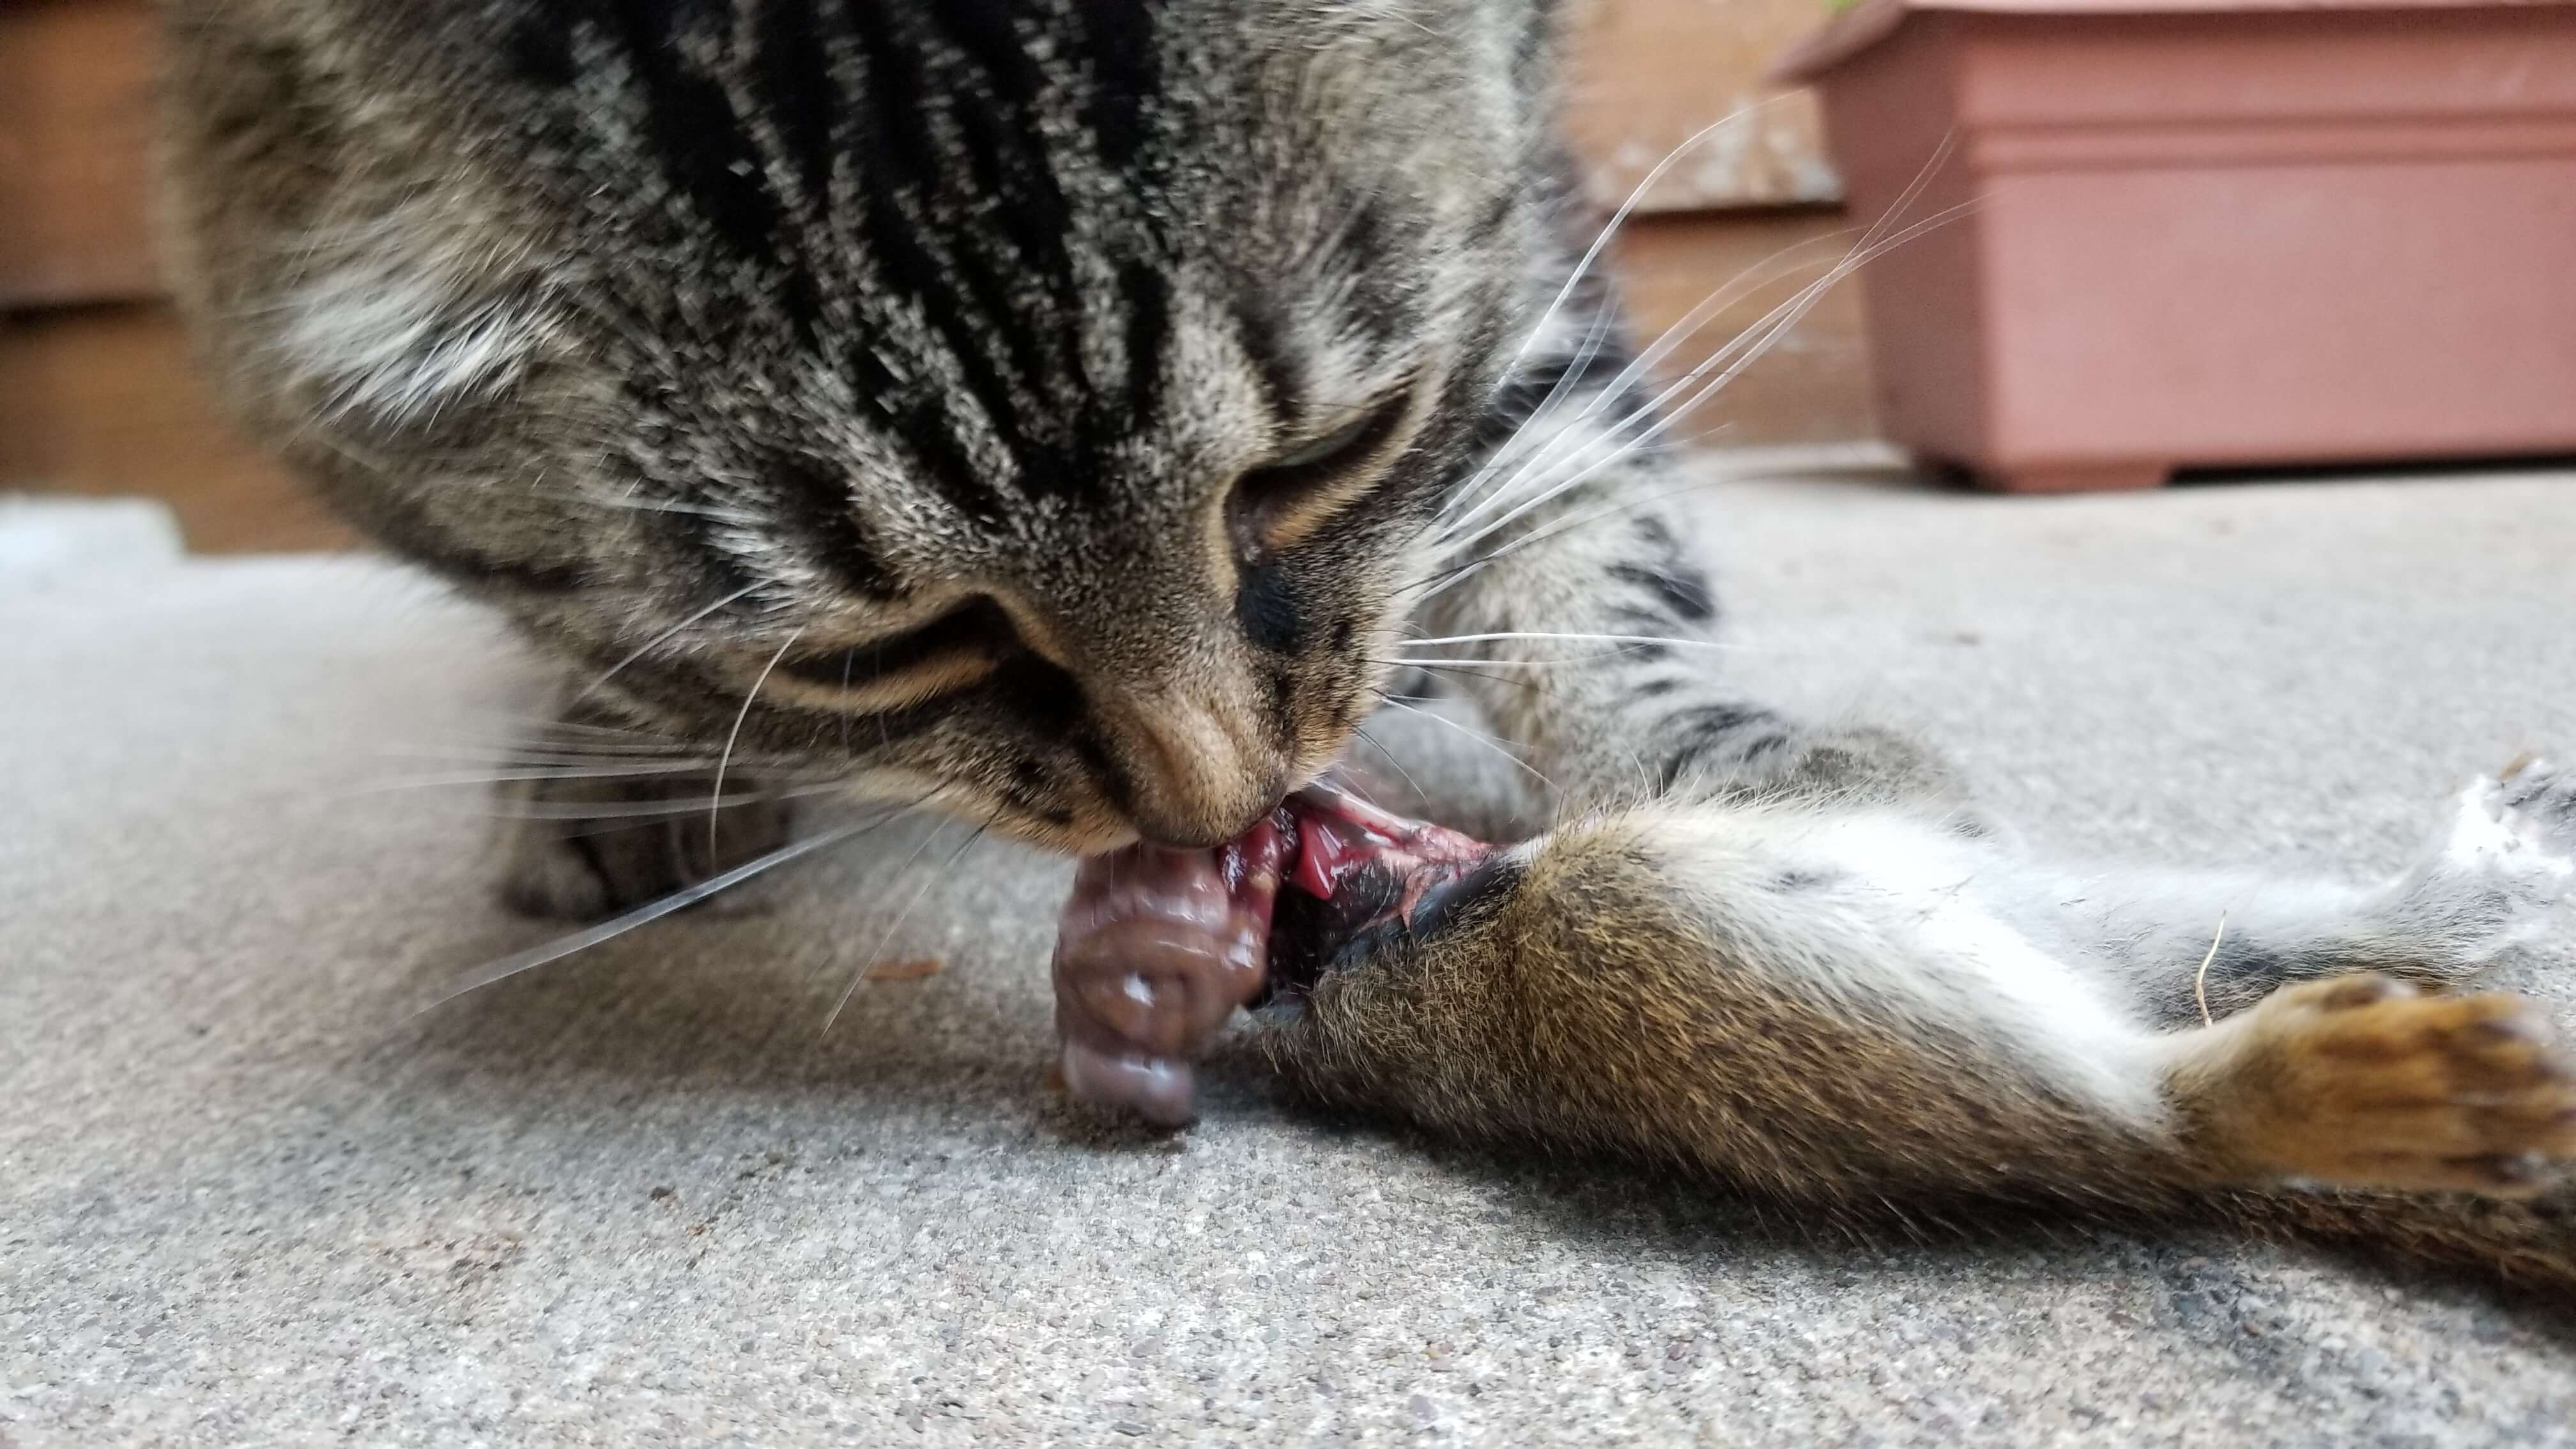 Forest eating squirrel guts are cats omnivores